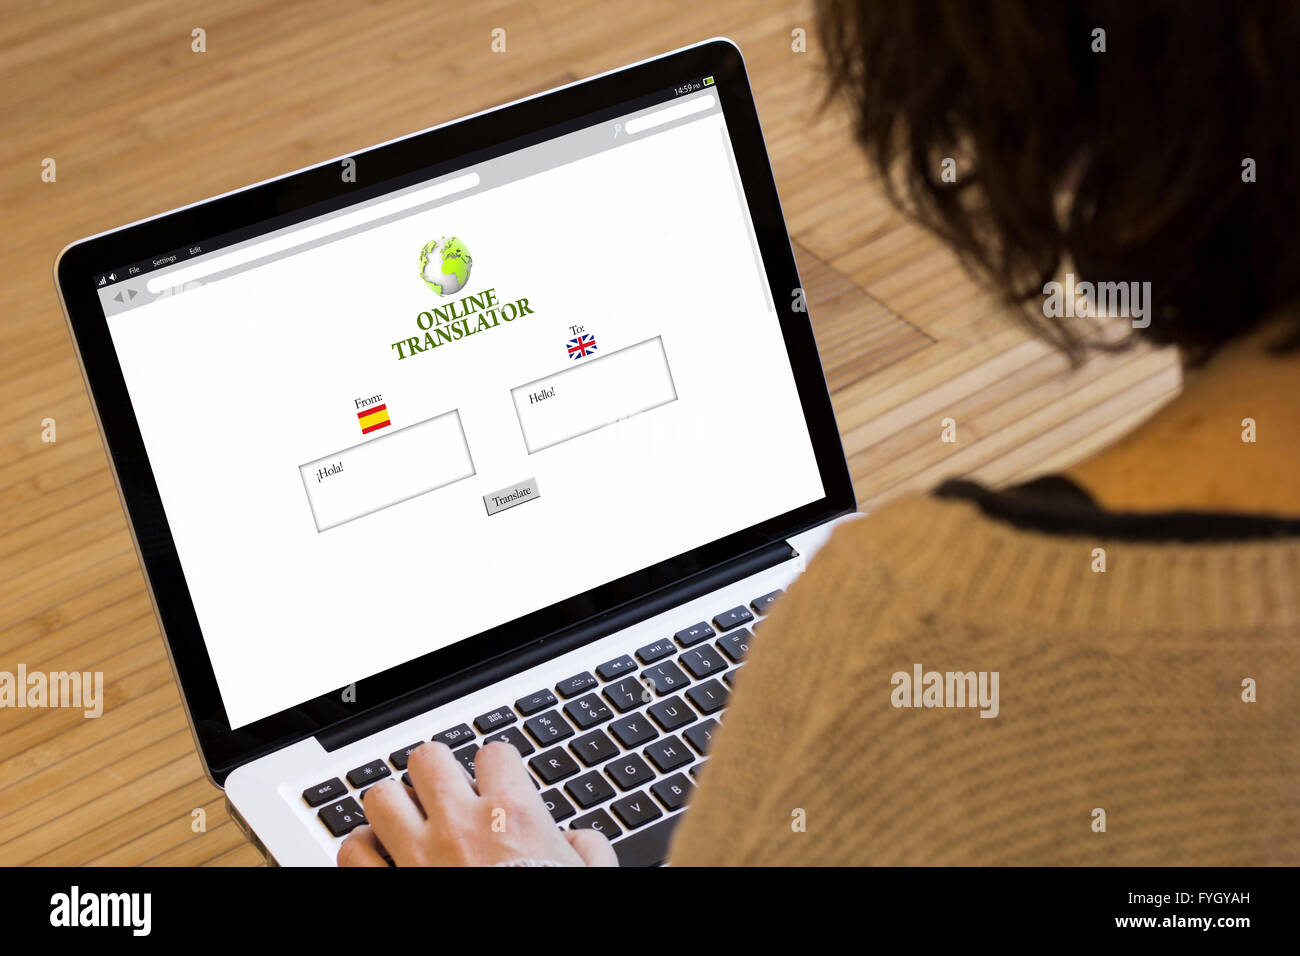 translation concept: online translator on a laptop screen. Screen graphics are made up. Stock Photo